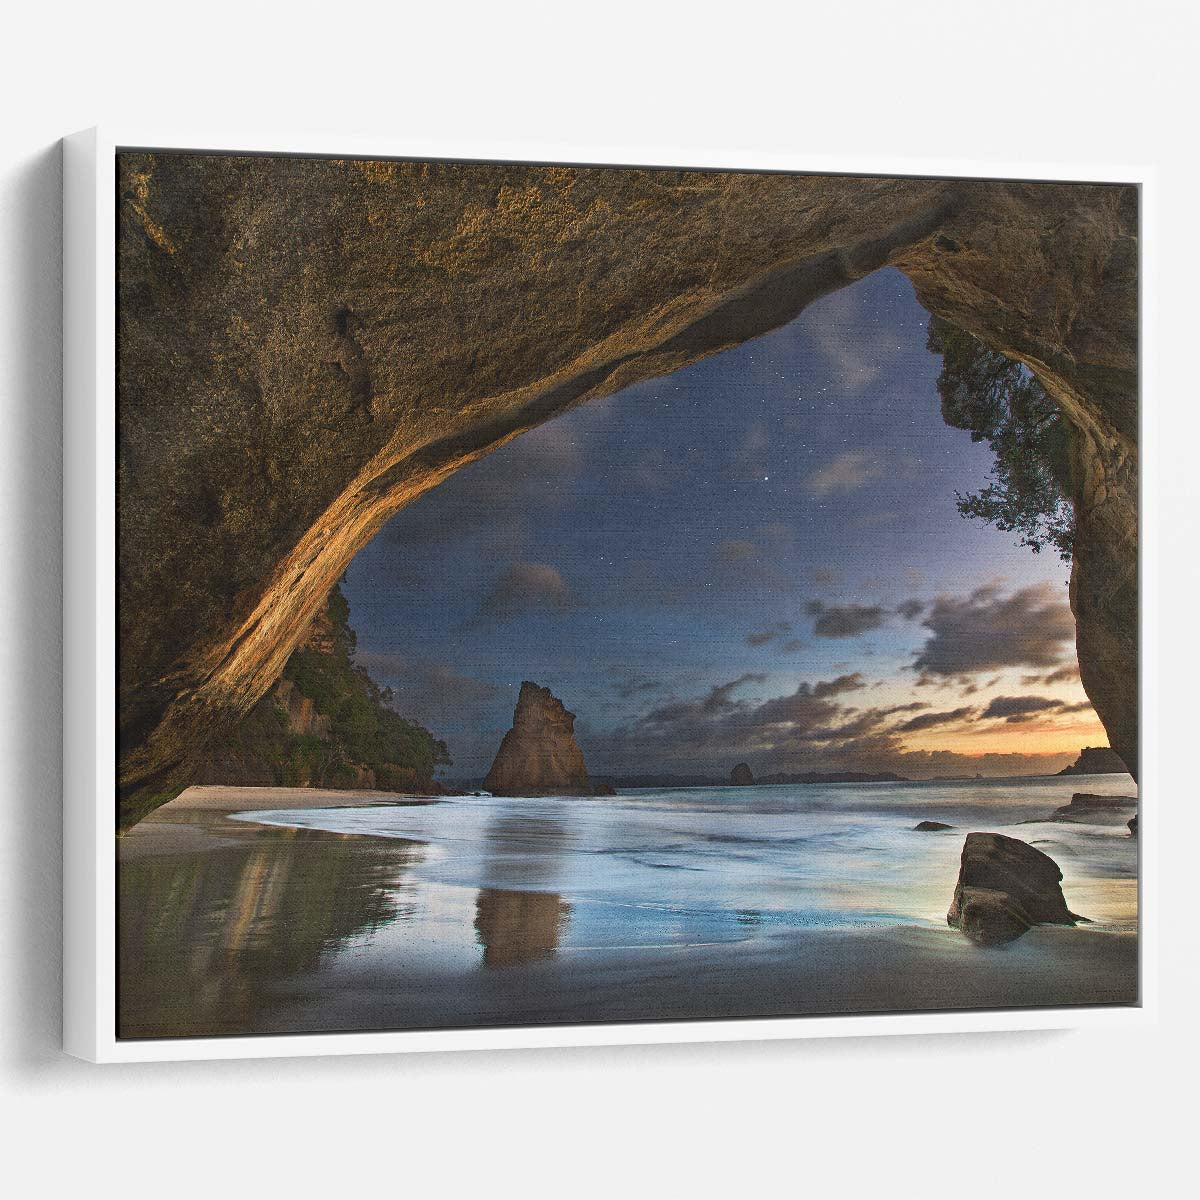 New Zealand Cathedral Cove Sunset Seascape Wall Art by Luxuriance Designs. Made in USA.